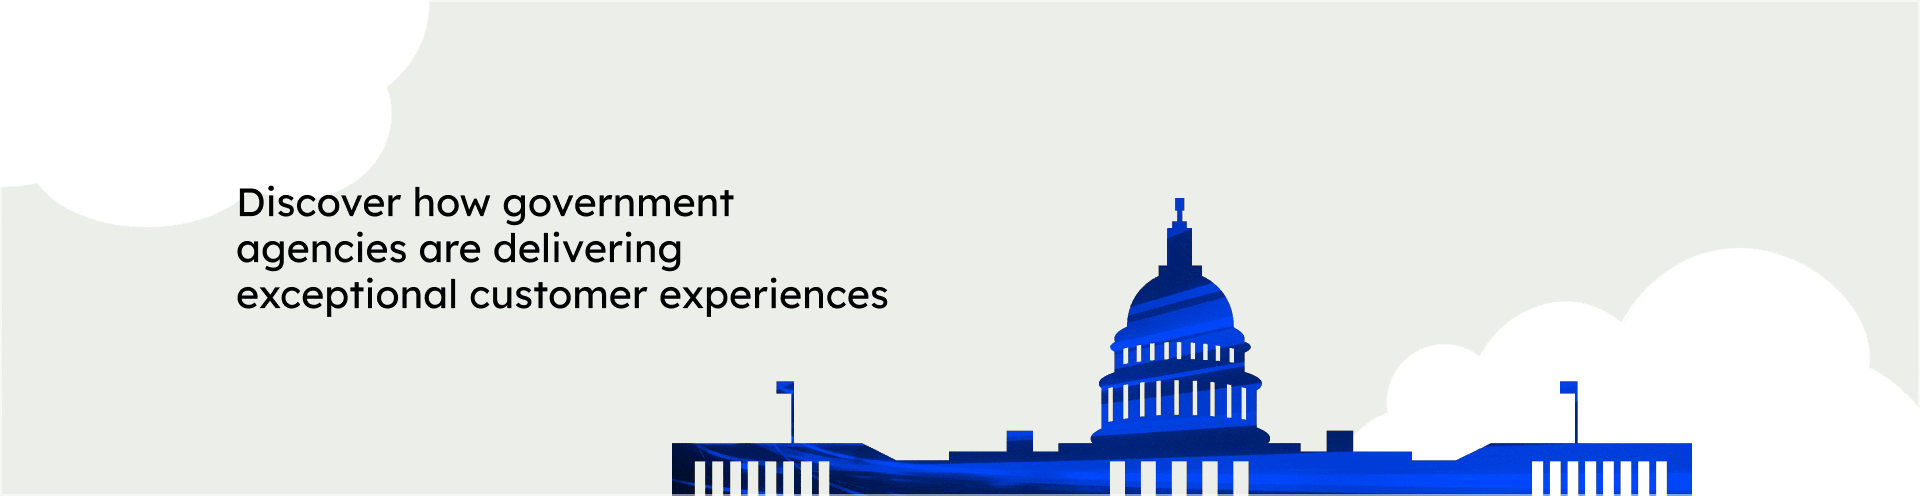 Discover how government agencies are delivering exceptional customer experiences